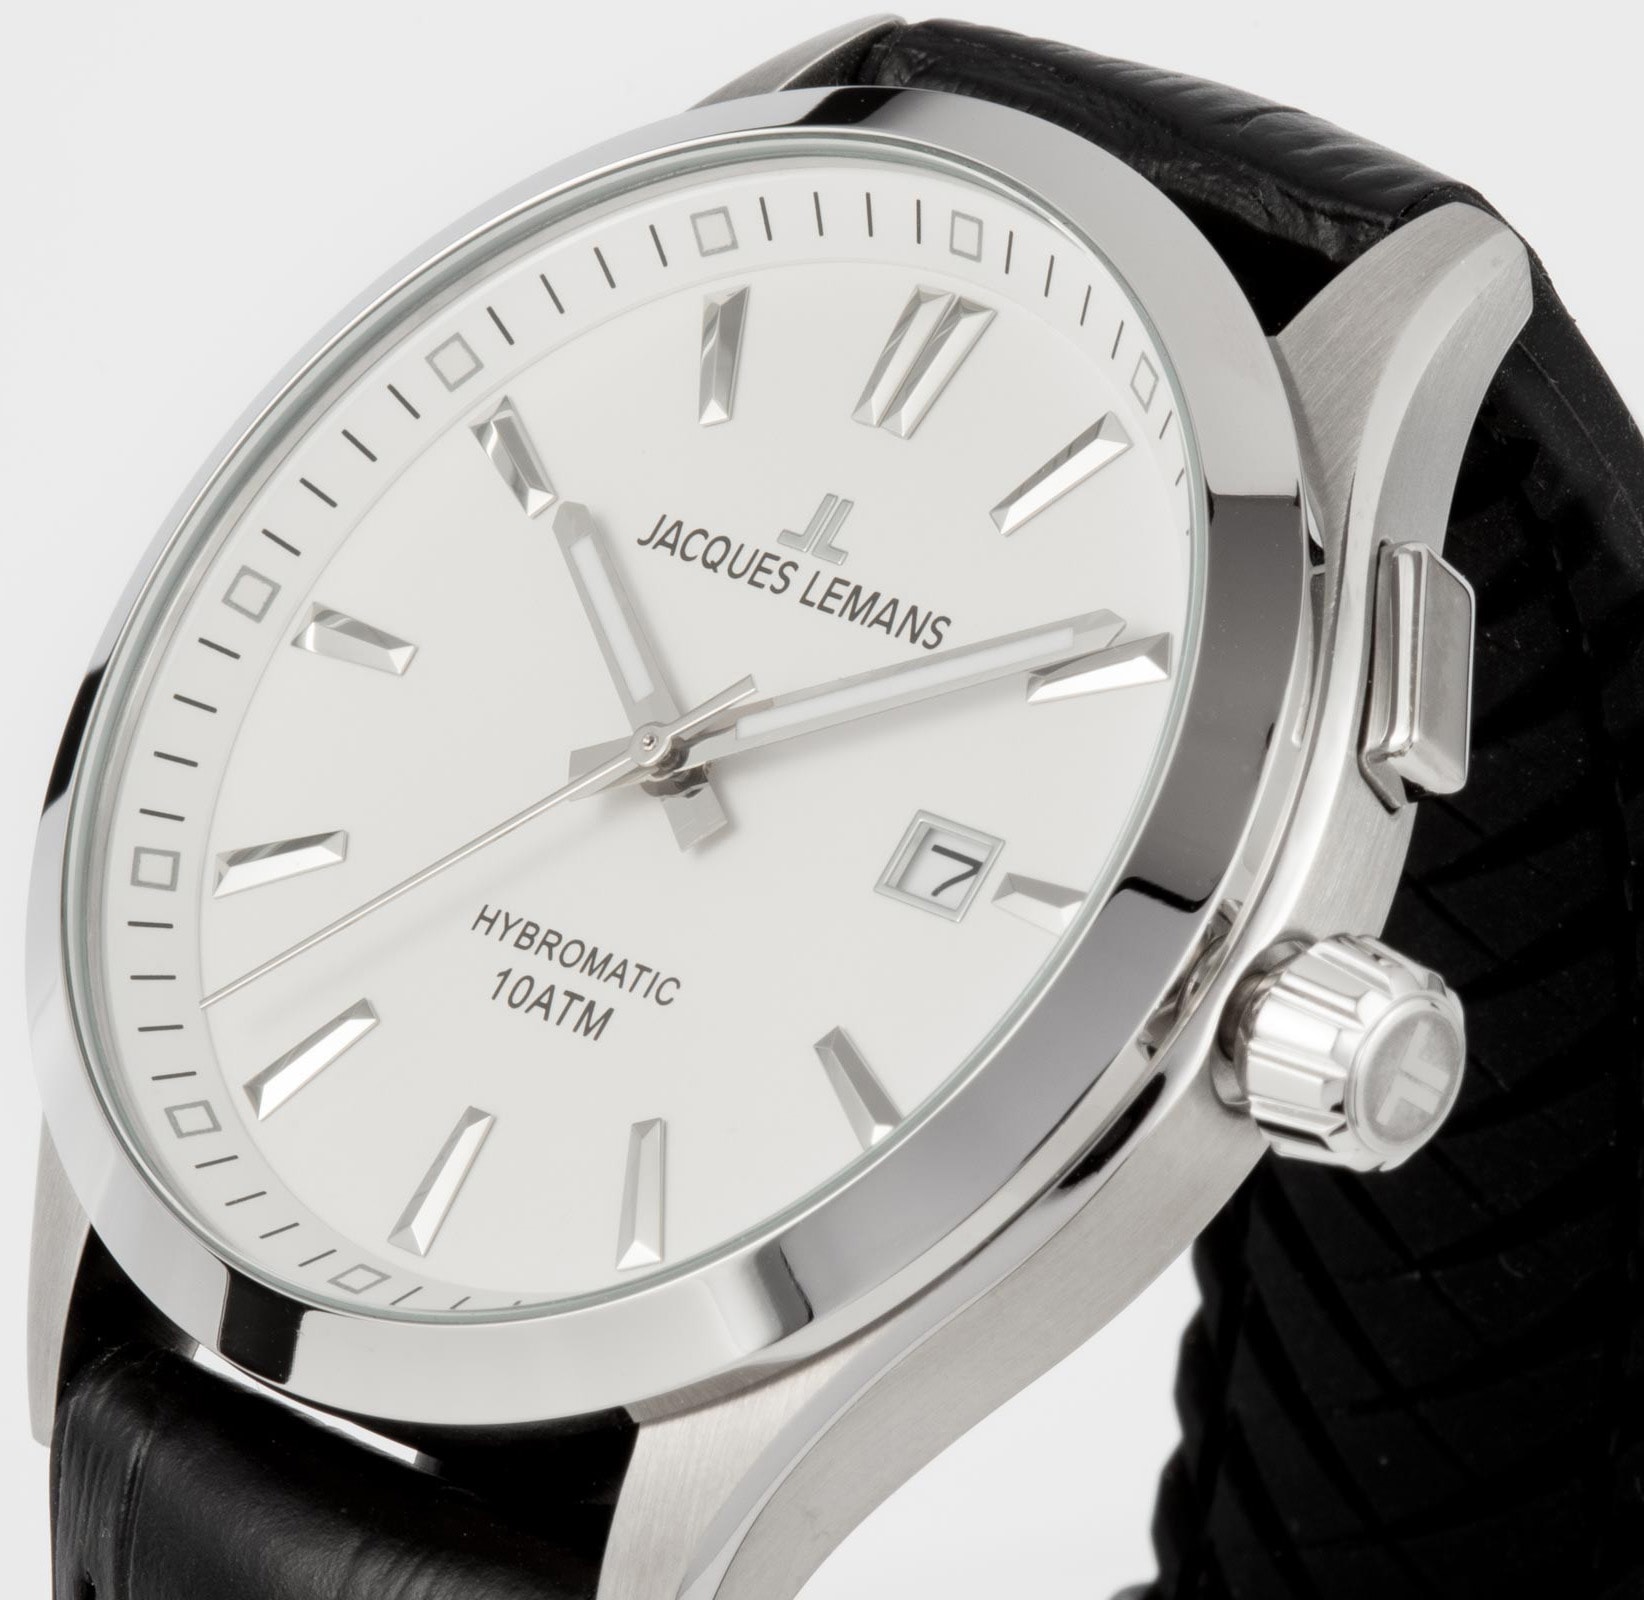 Jacques Lemans Kineticuhr »Hybromatic, 1-2130B« bei